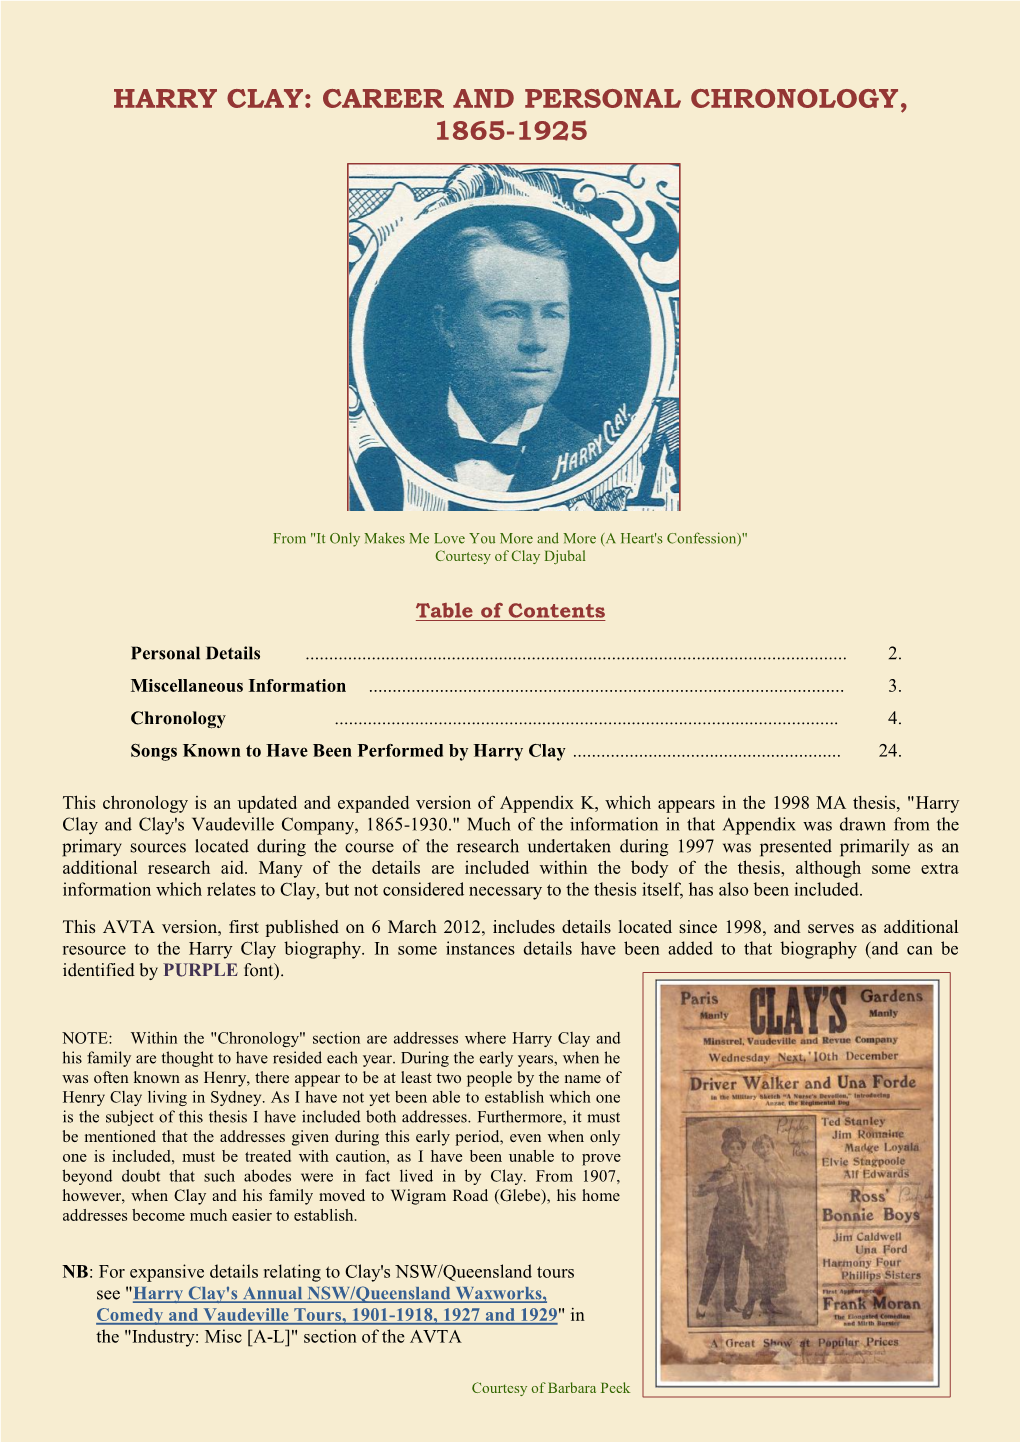 Harry Clay: Career and Personal Chronology, 1865-1925